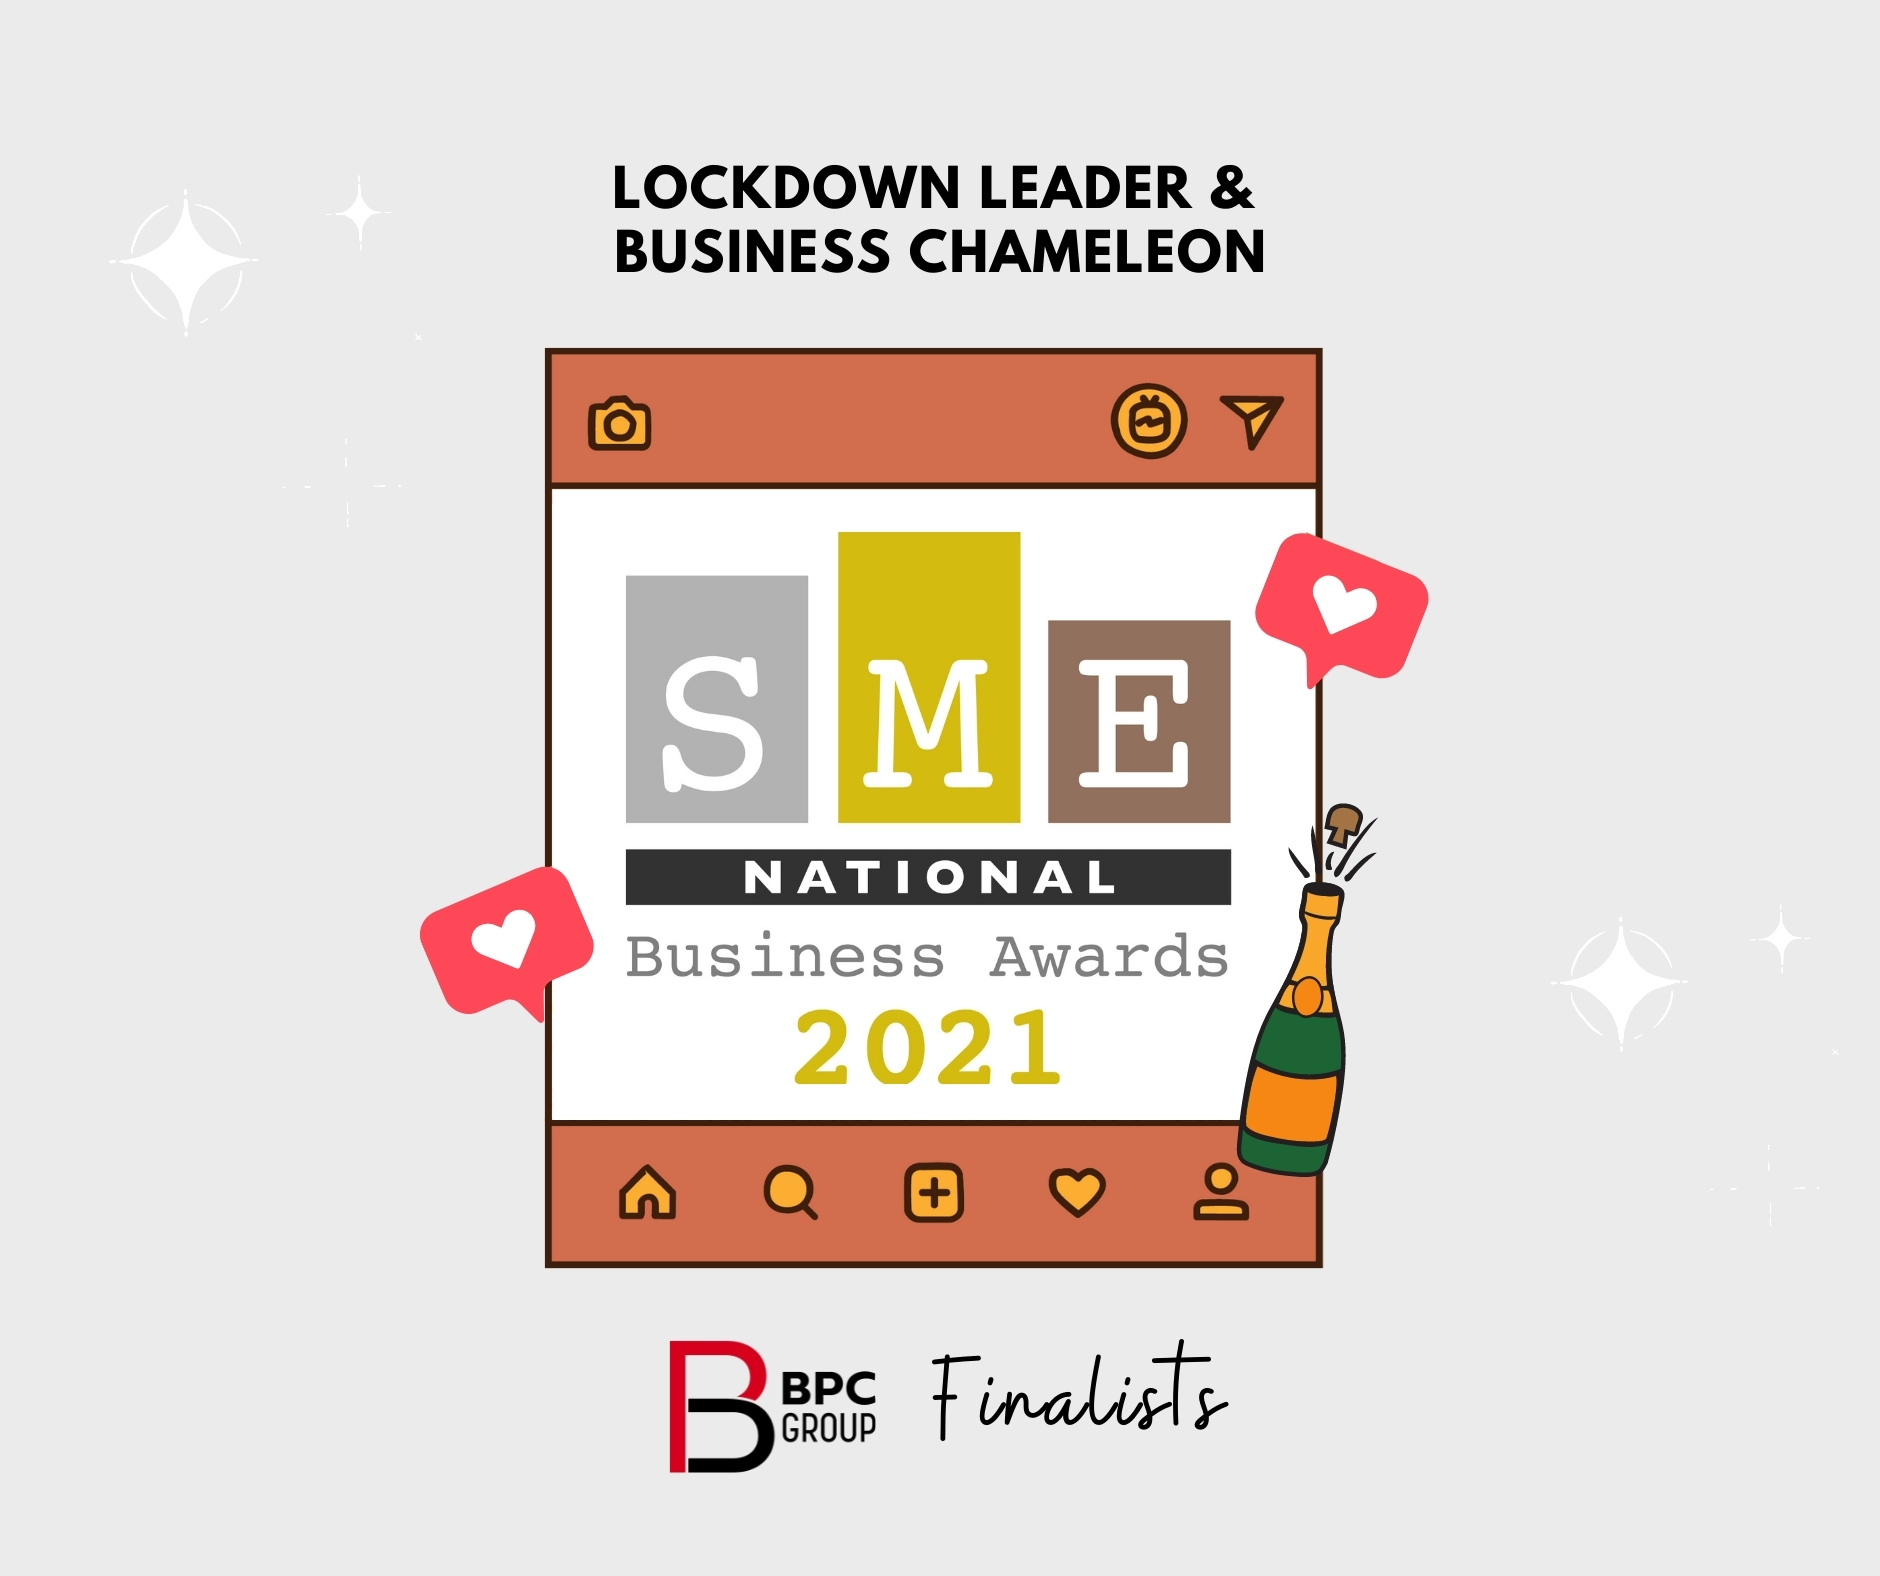 BPC Group have been announced as finalists for both Business Chameleon and Lockdown Leader at the 2021 SME National Awards image